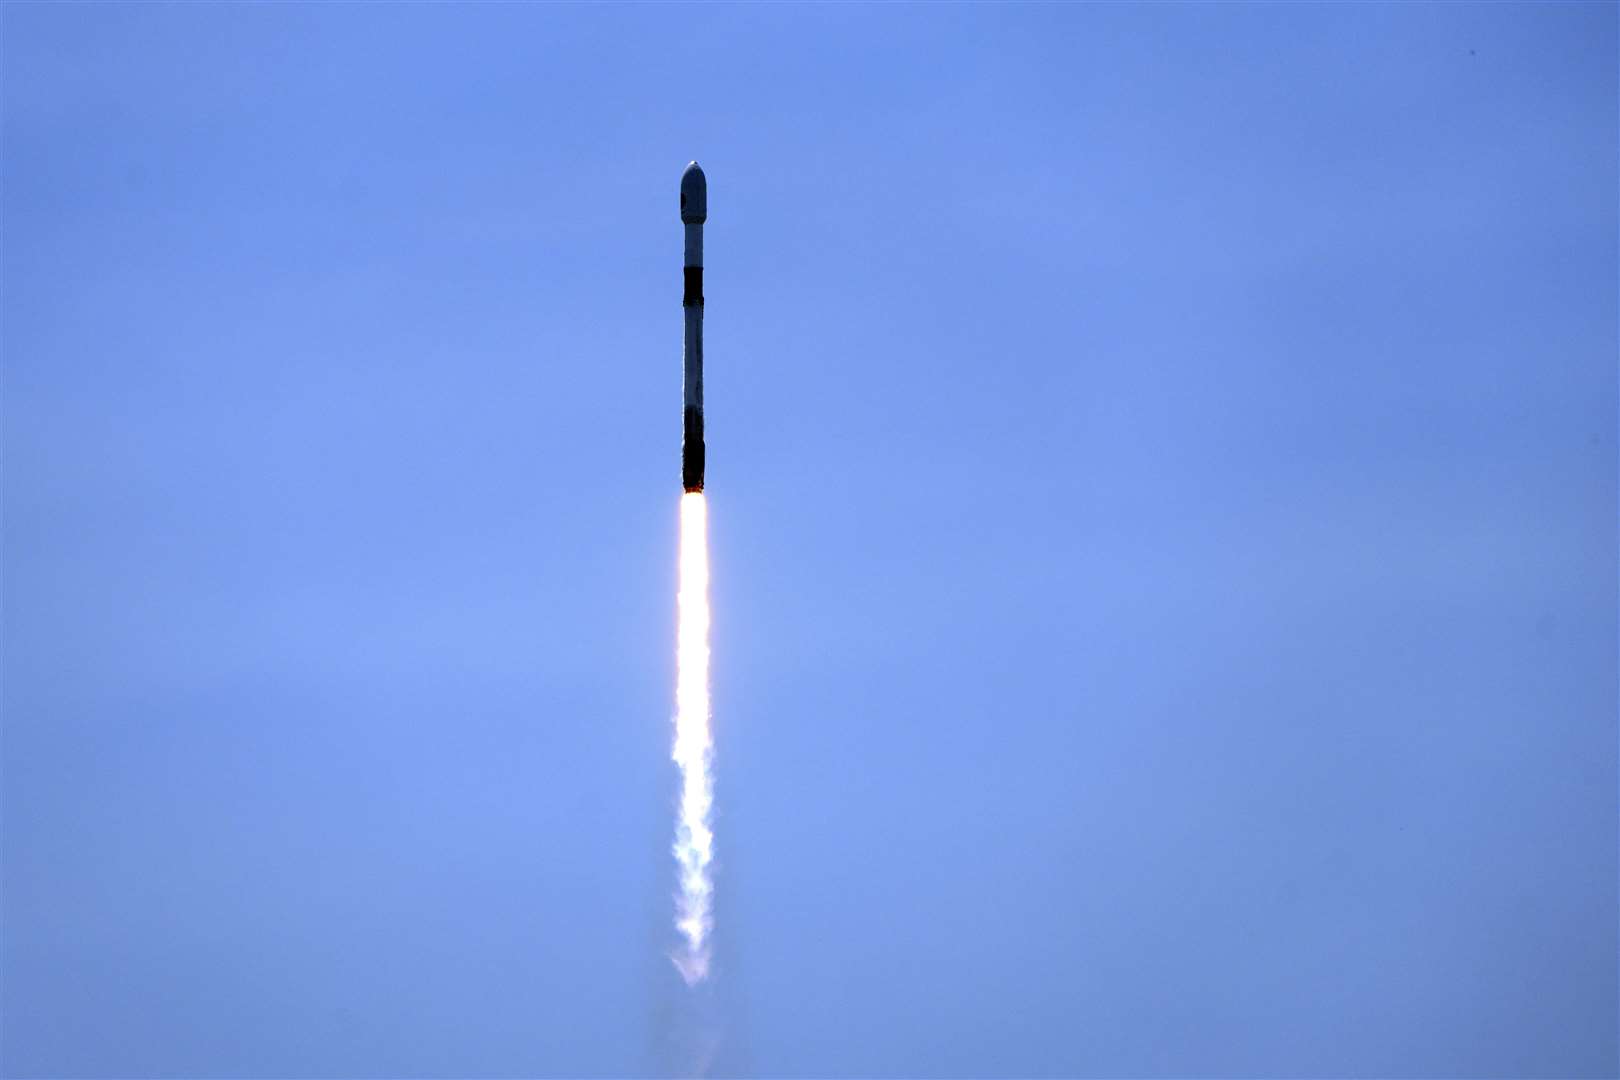 A SpaceX Falcon 9 rocket, with the European Space Agency Euclid space telescope, lifts off from pad 40 at the Cape Canaveral Space Force Station in Florida (AP)